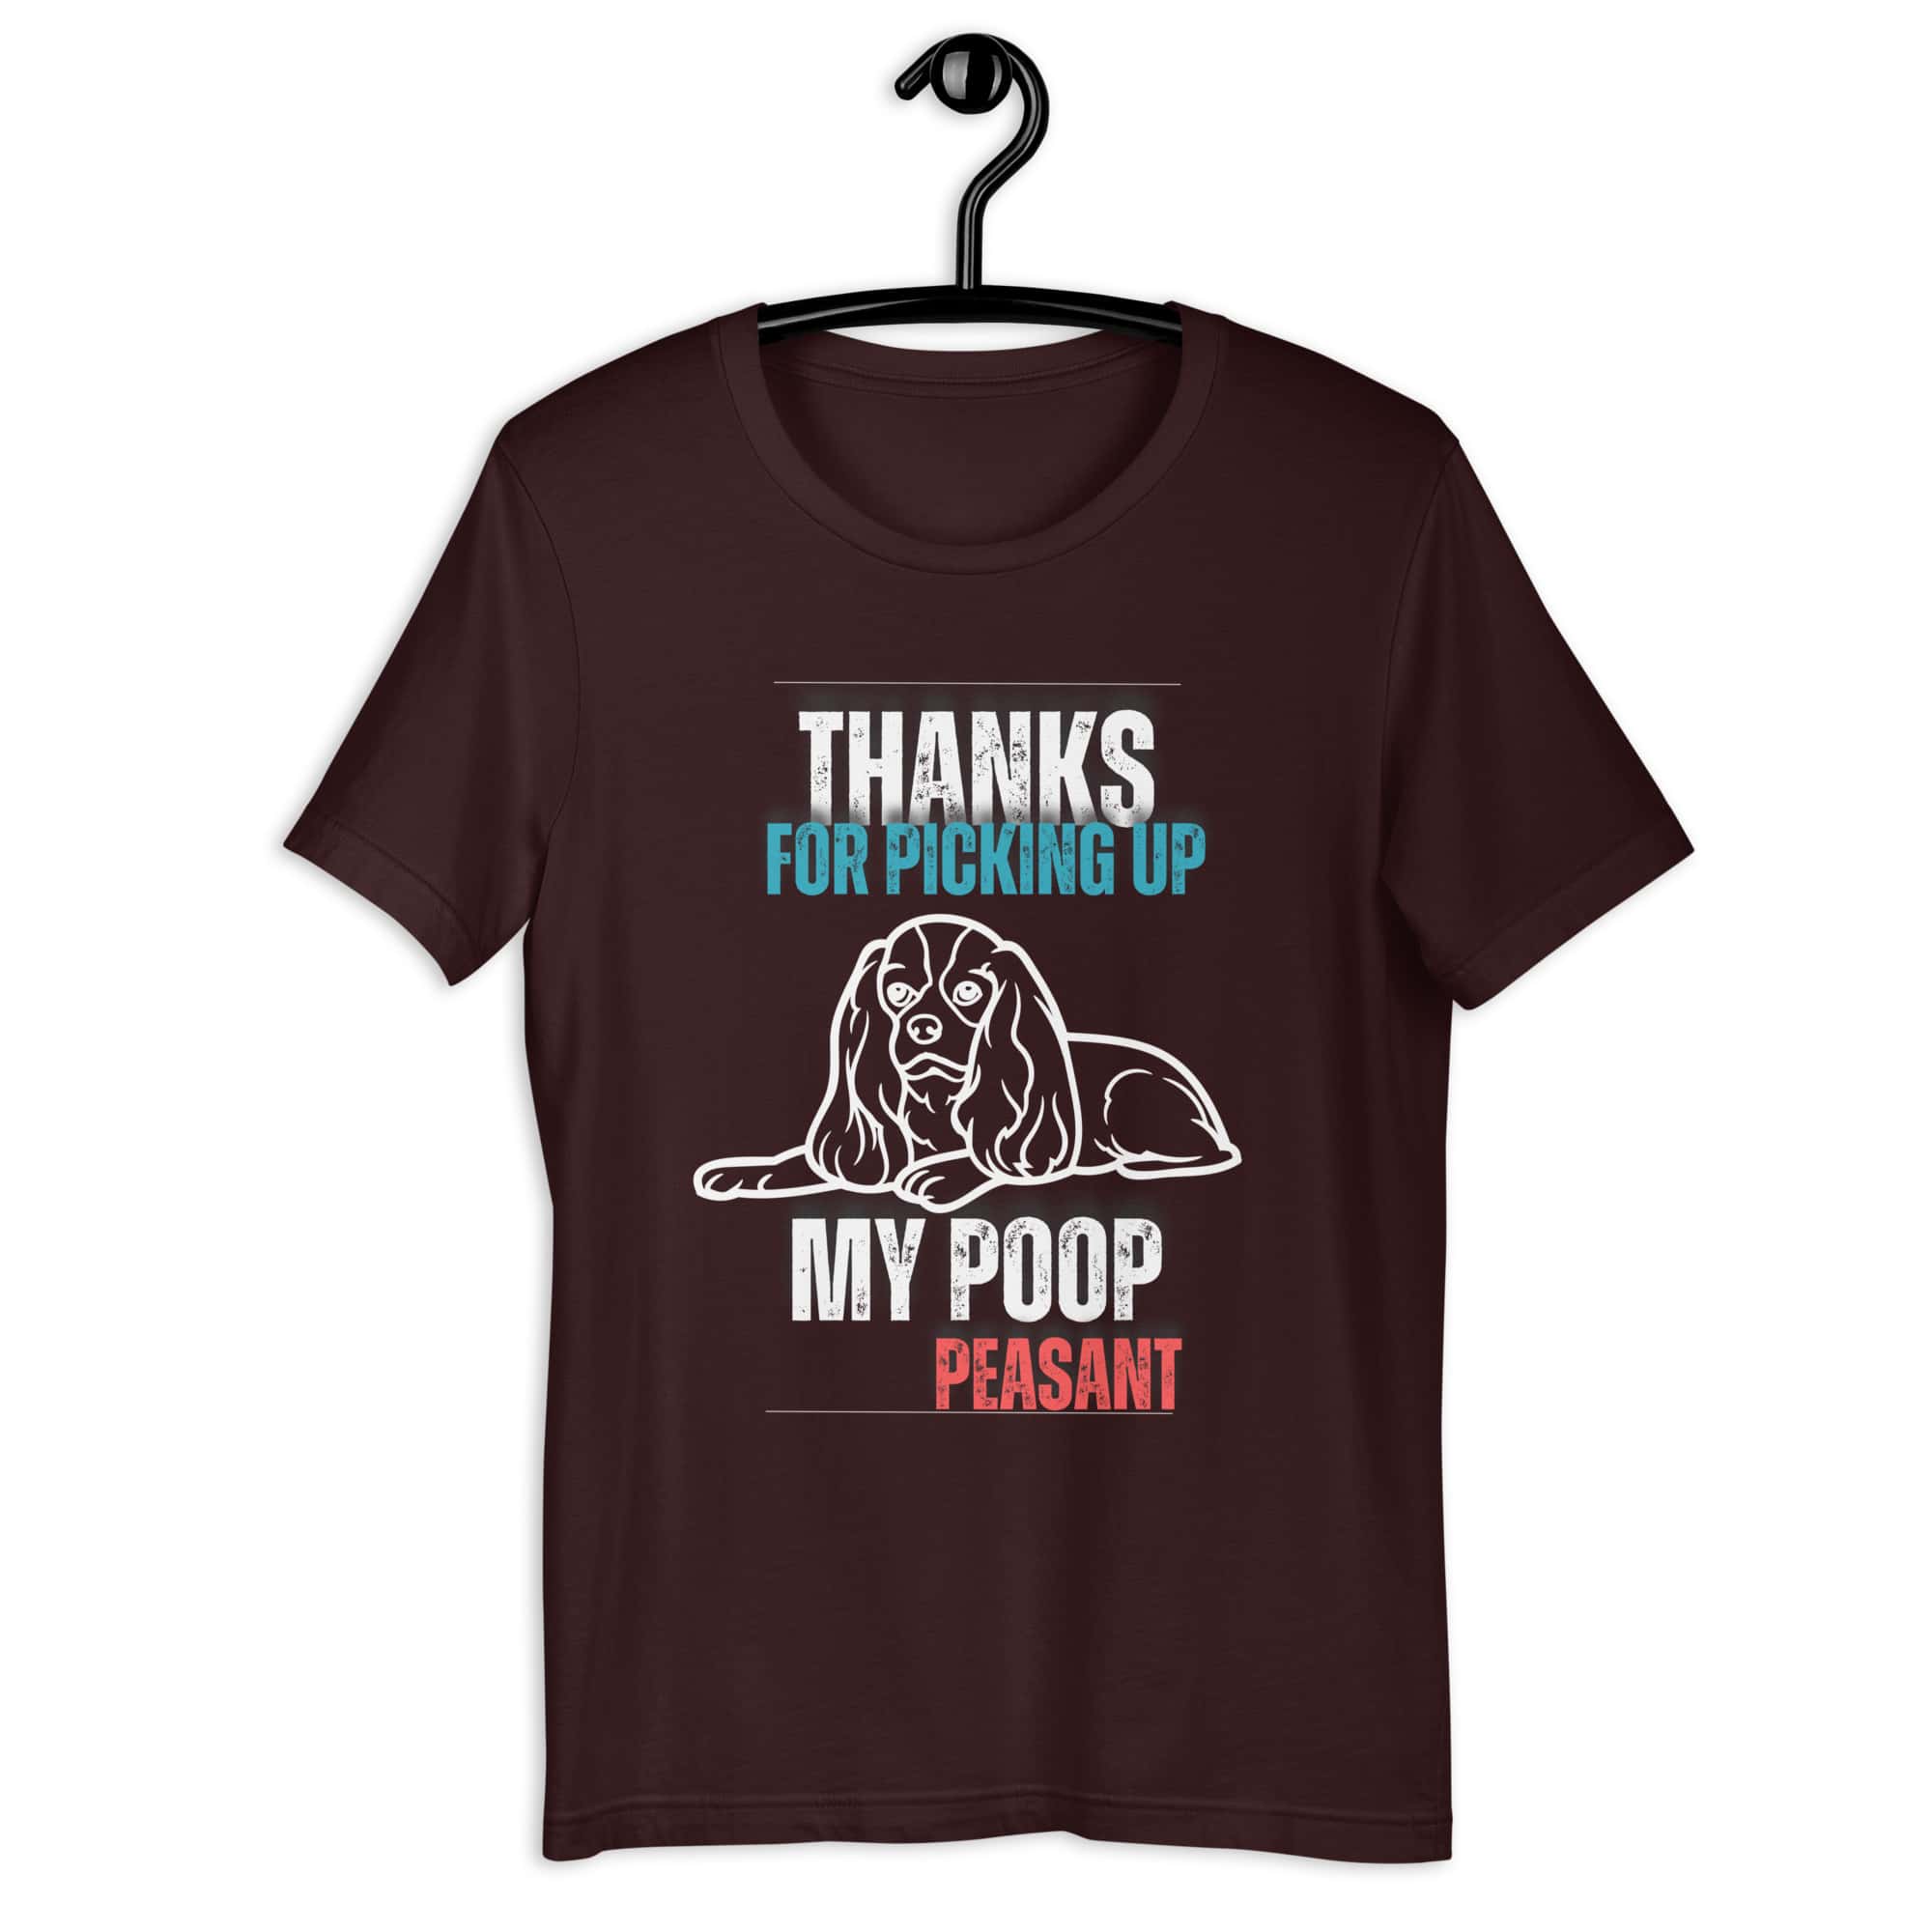 Thanks For Picking Up My POOP Funny Hounds Unisex T-Shirt. Oxblood Black